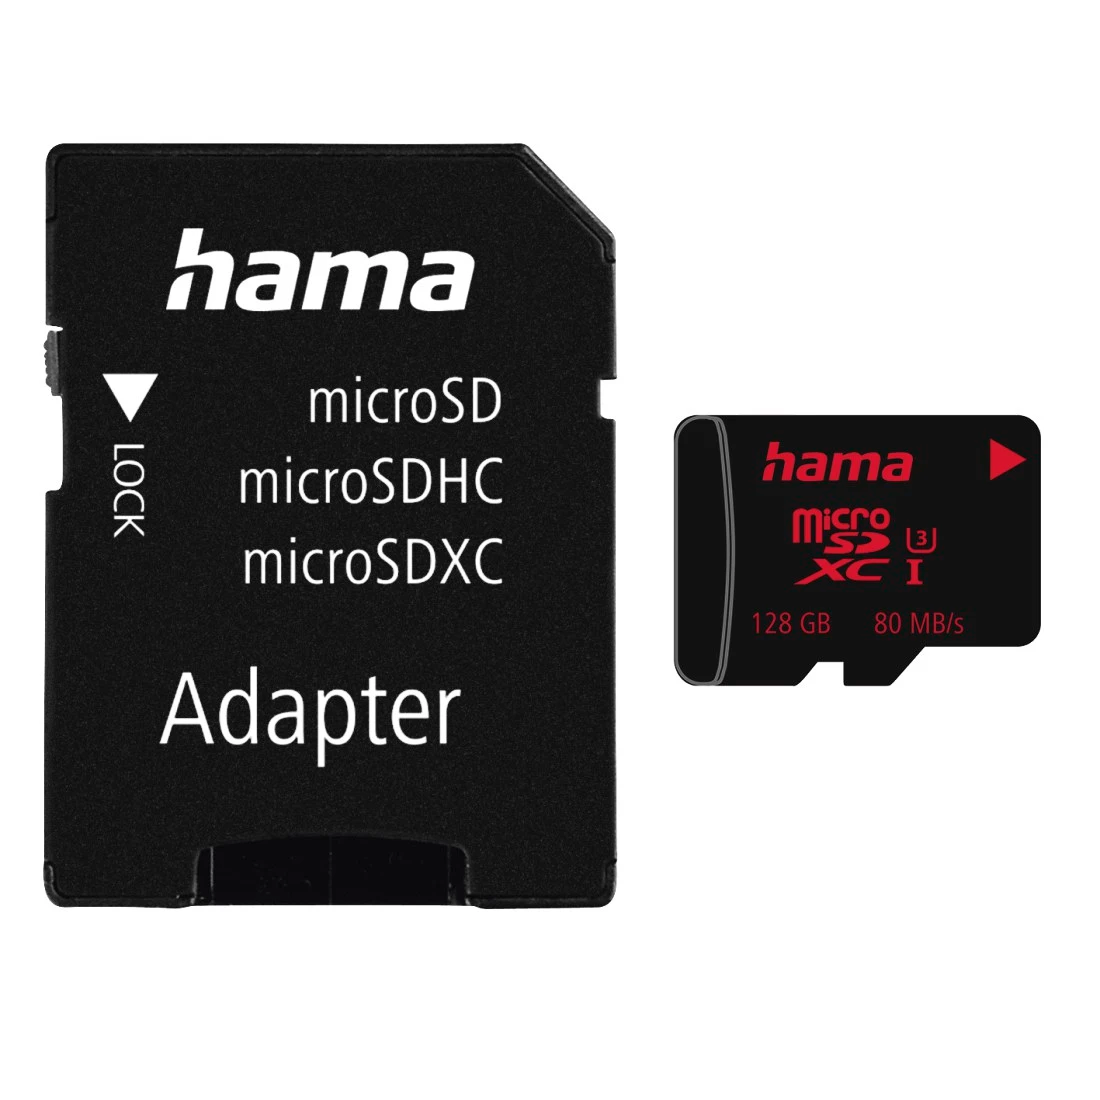 Hama MicroSDXC UHS-I 80MB/s Class 3 128GB Memory Card with Adapter - Black | 345936 from Hama - DID Electrical